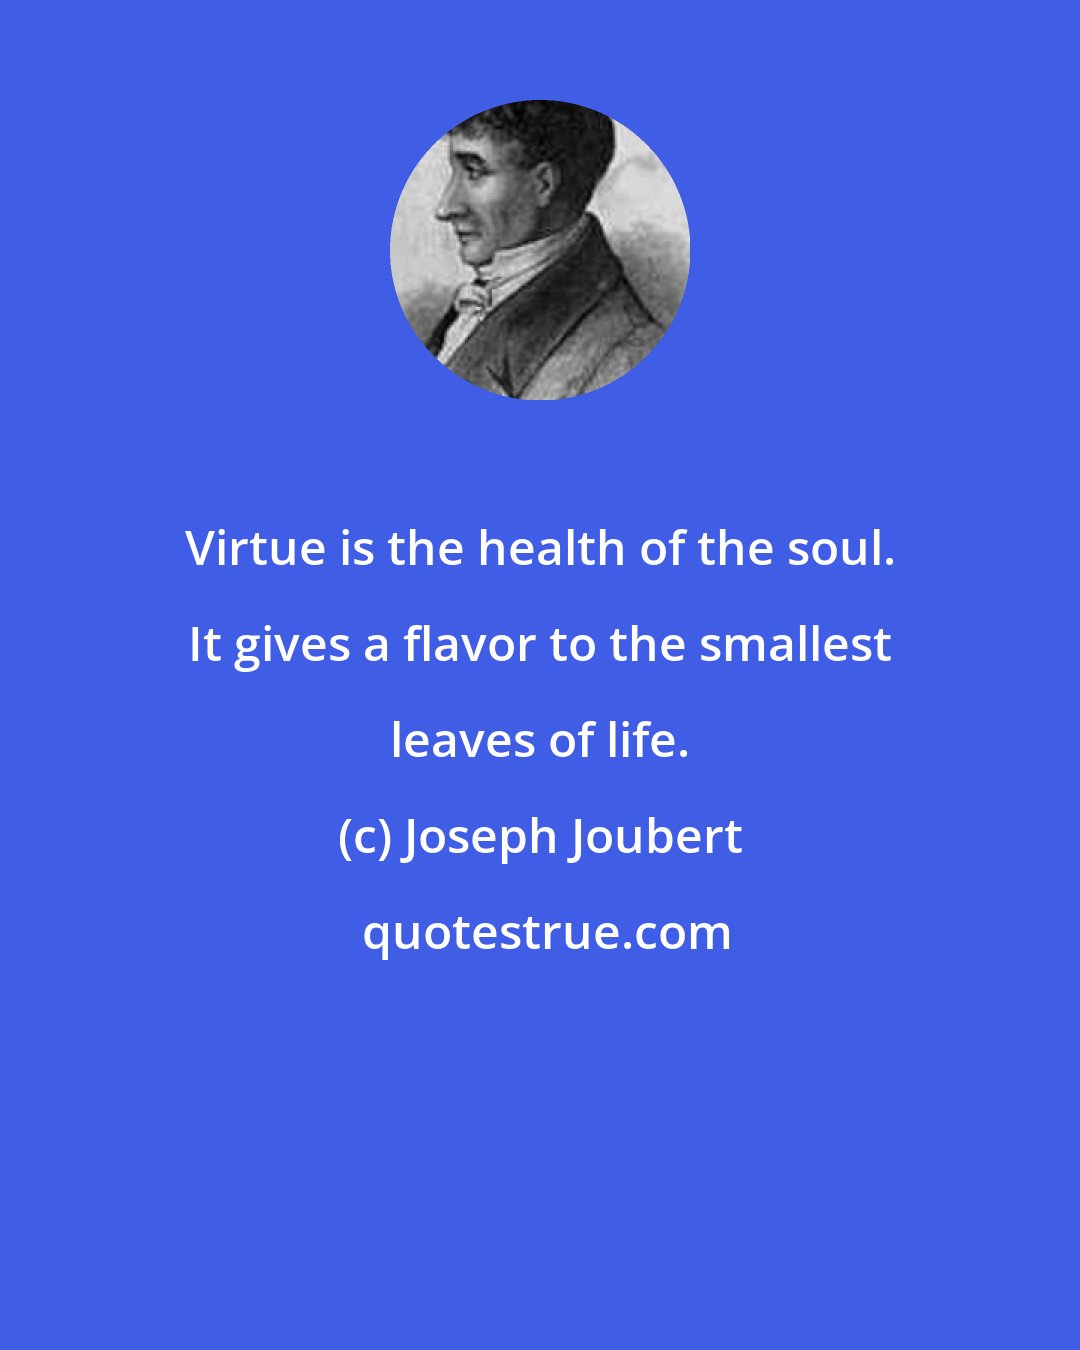 Joseph Joubert: Virtue is the health of the soul. It gives a flavor to the smallest leaves of life.